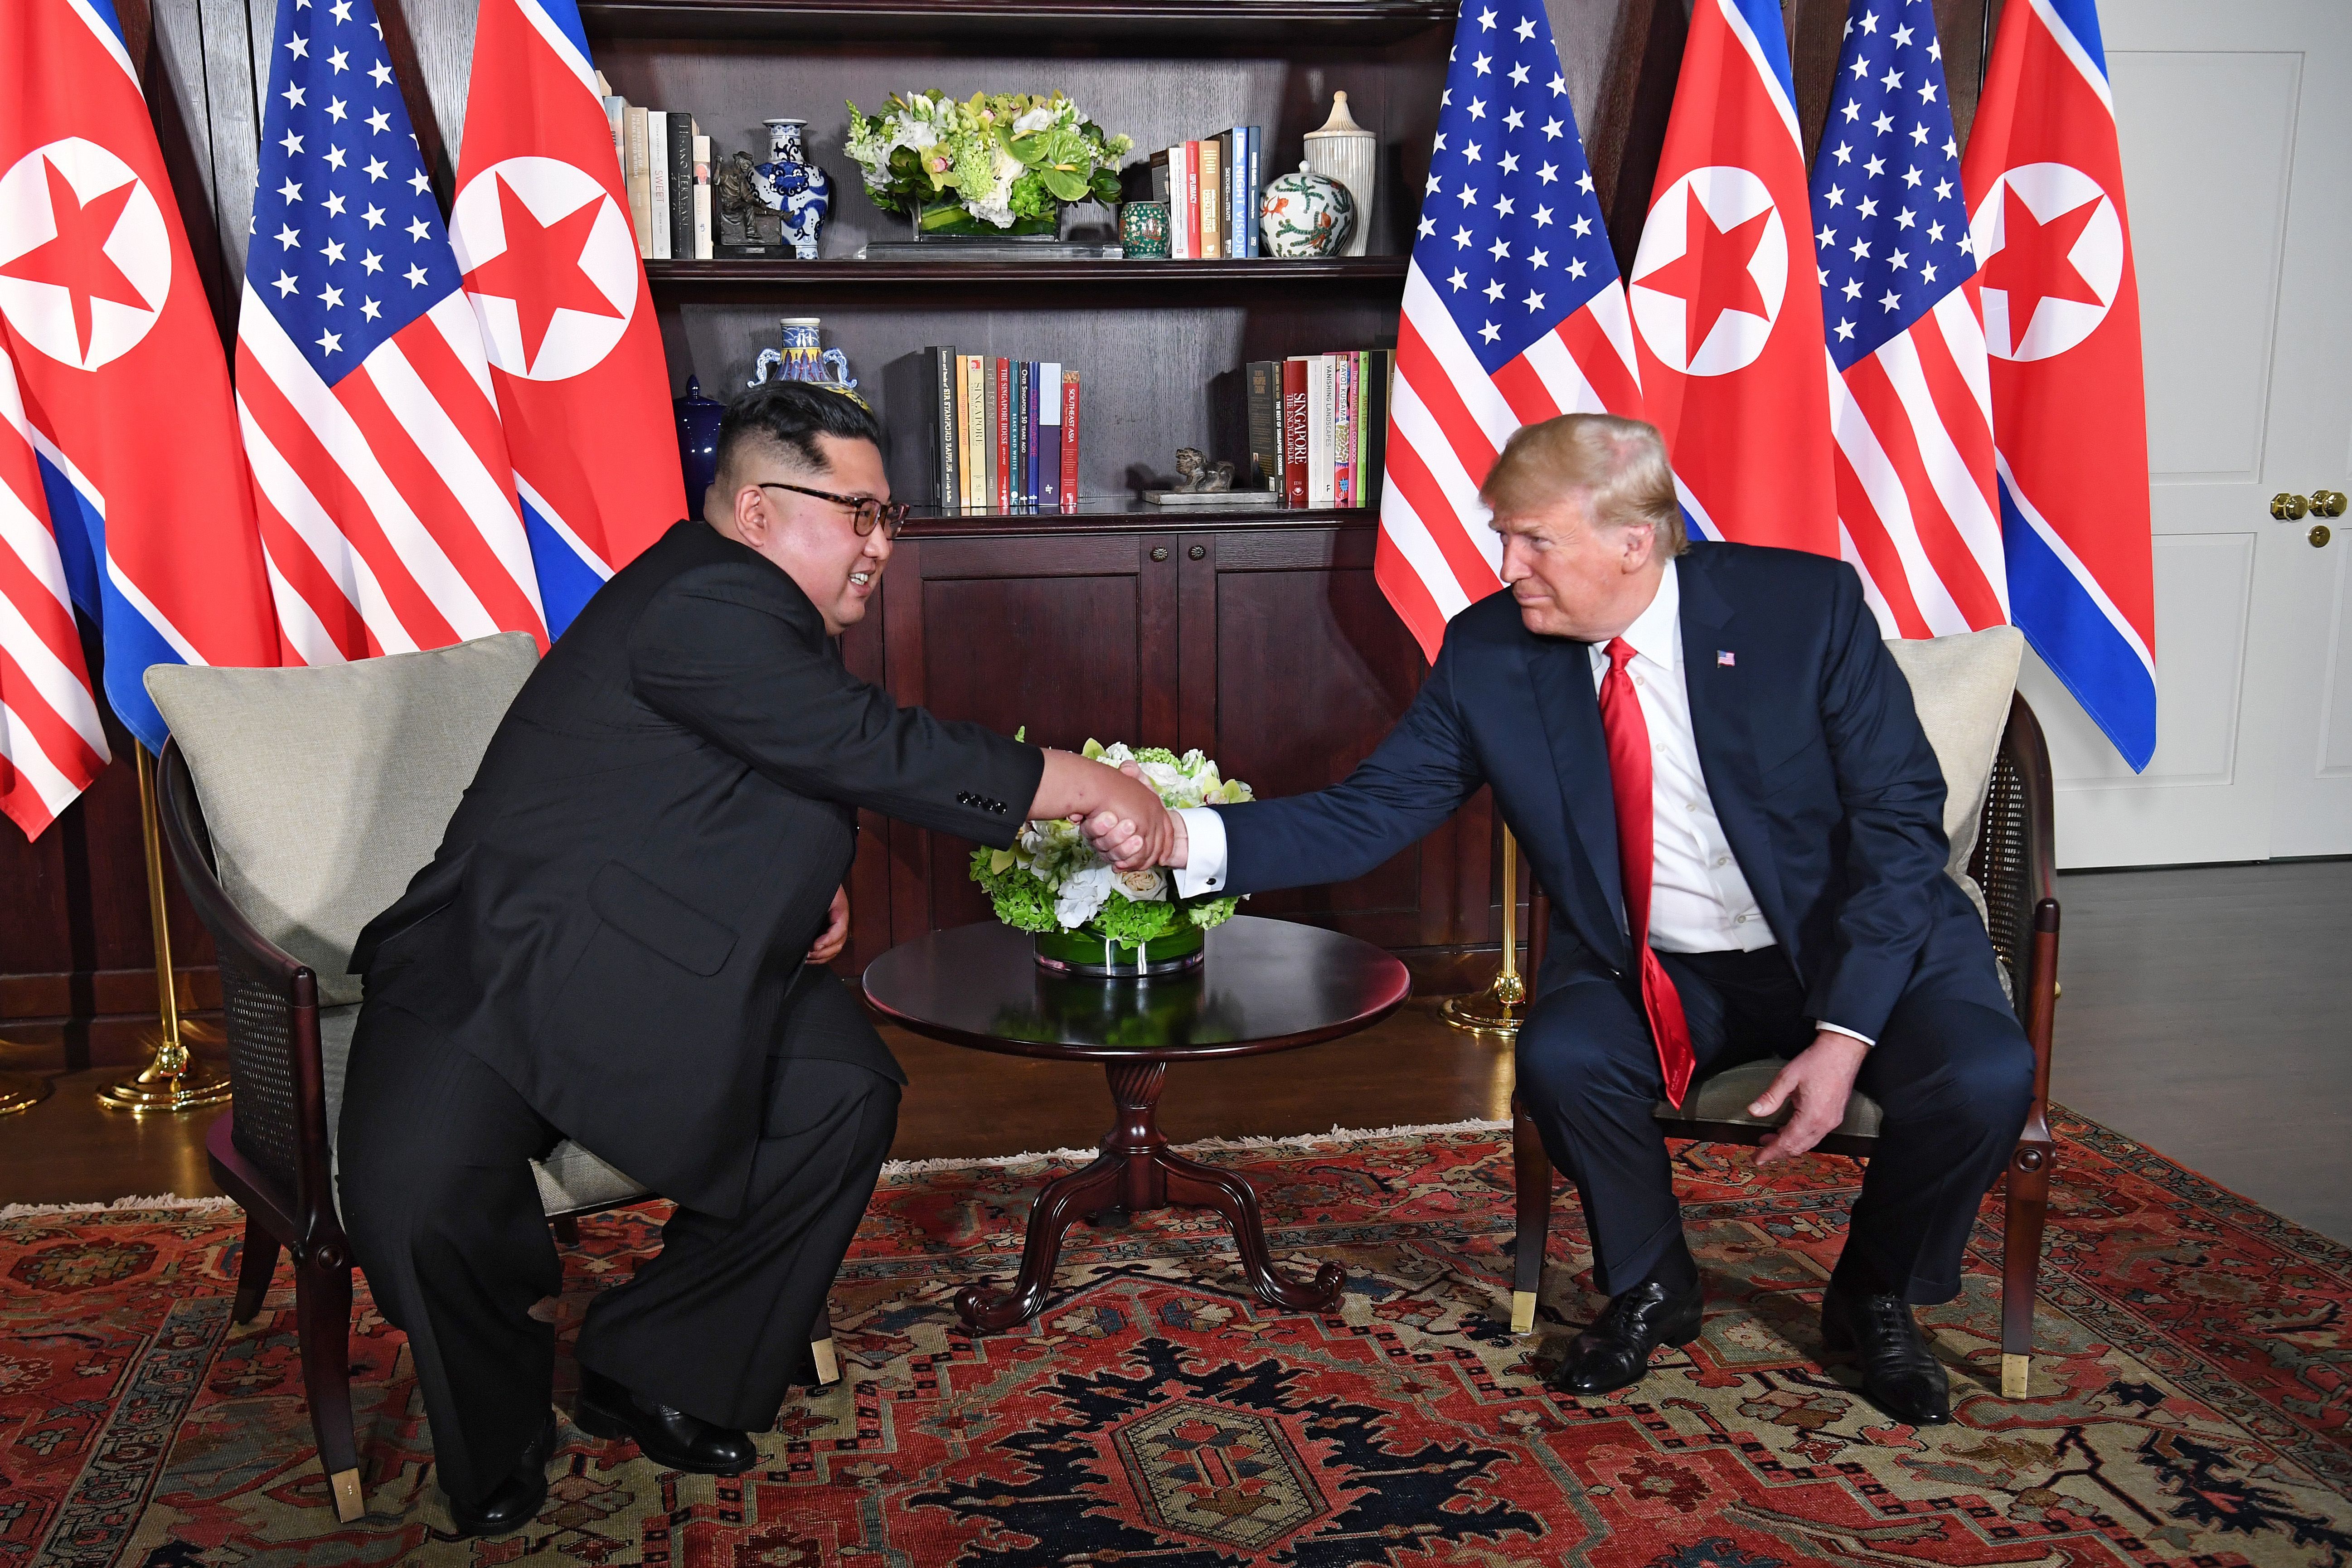 President Trump and Kim Jong-un shaking hands while seated in chairs